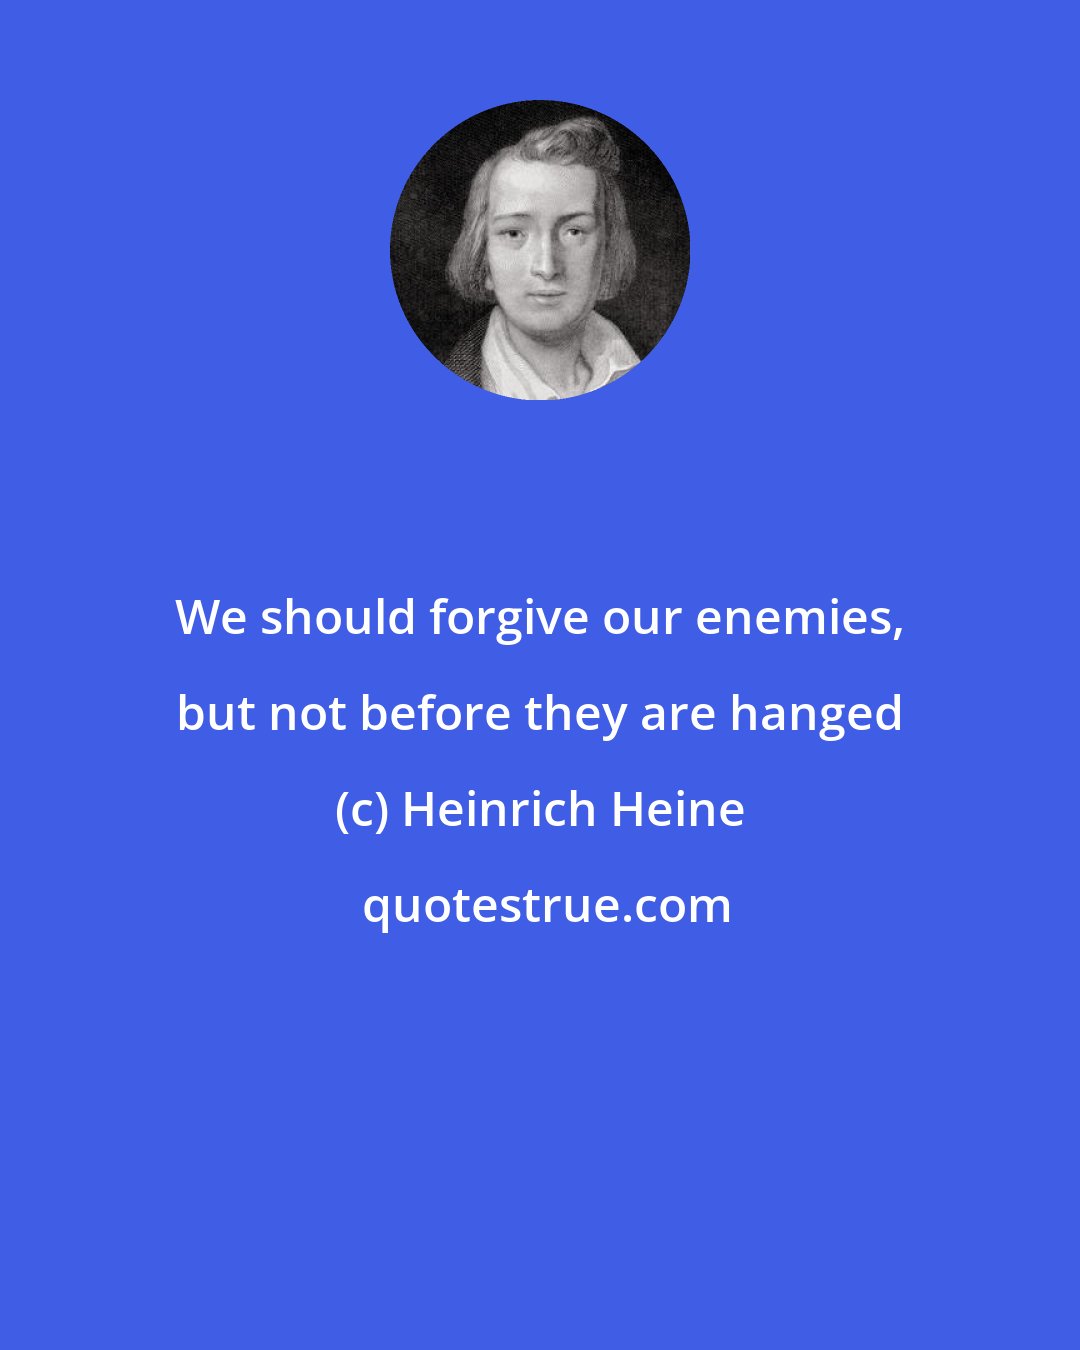 Heinrich Heine: We should forgive our enemies, but not before they are hanged